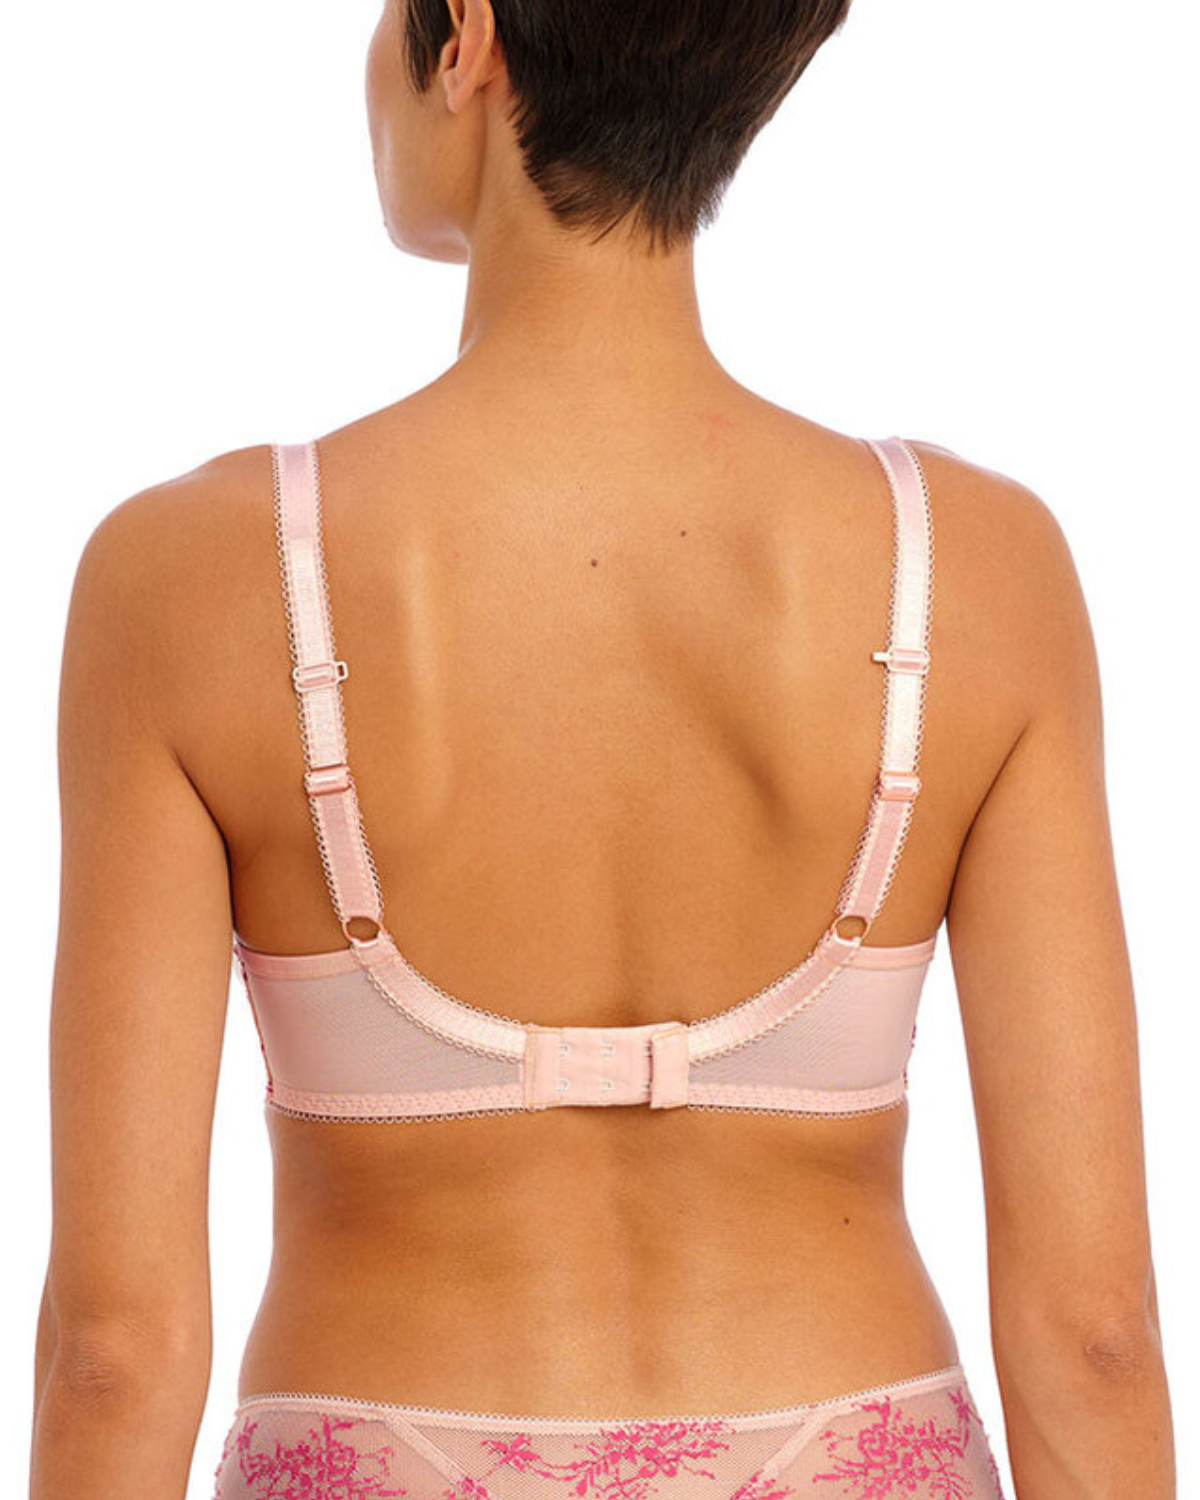 Offbeat Pink Moulded Bra from Freya